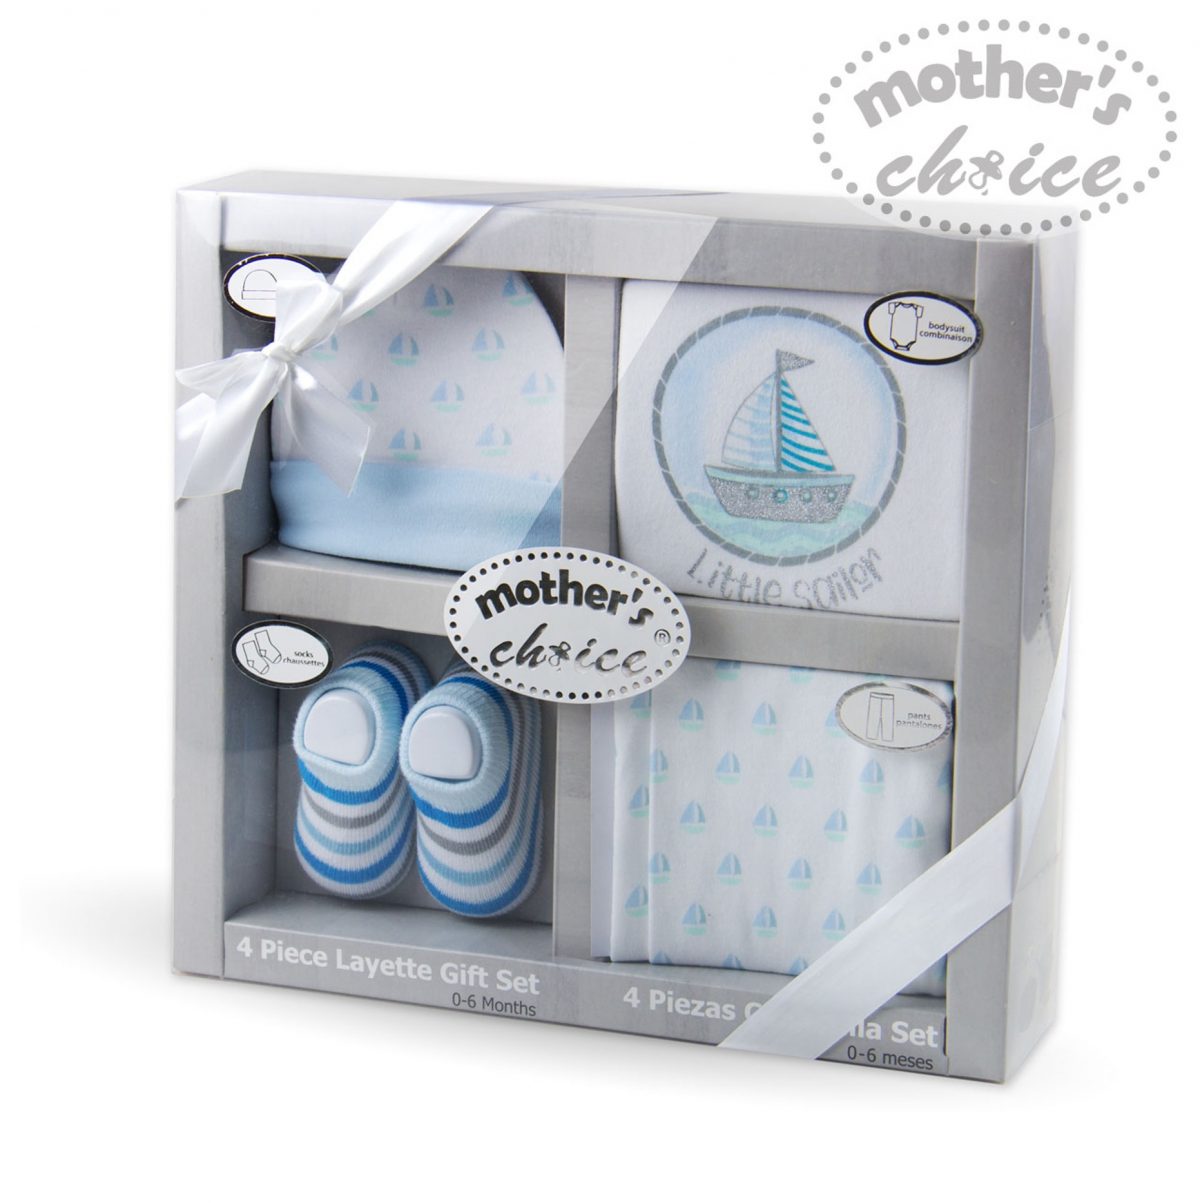 Mothers Choice 4pc boys giftset